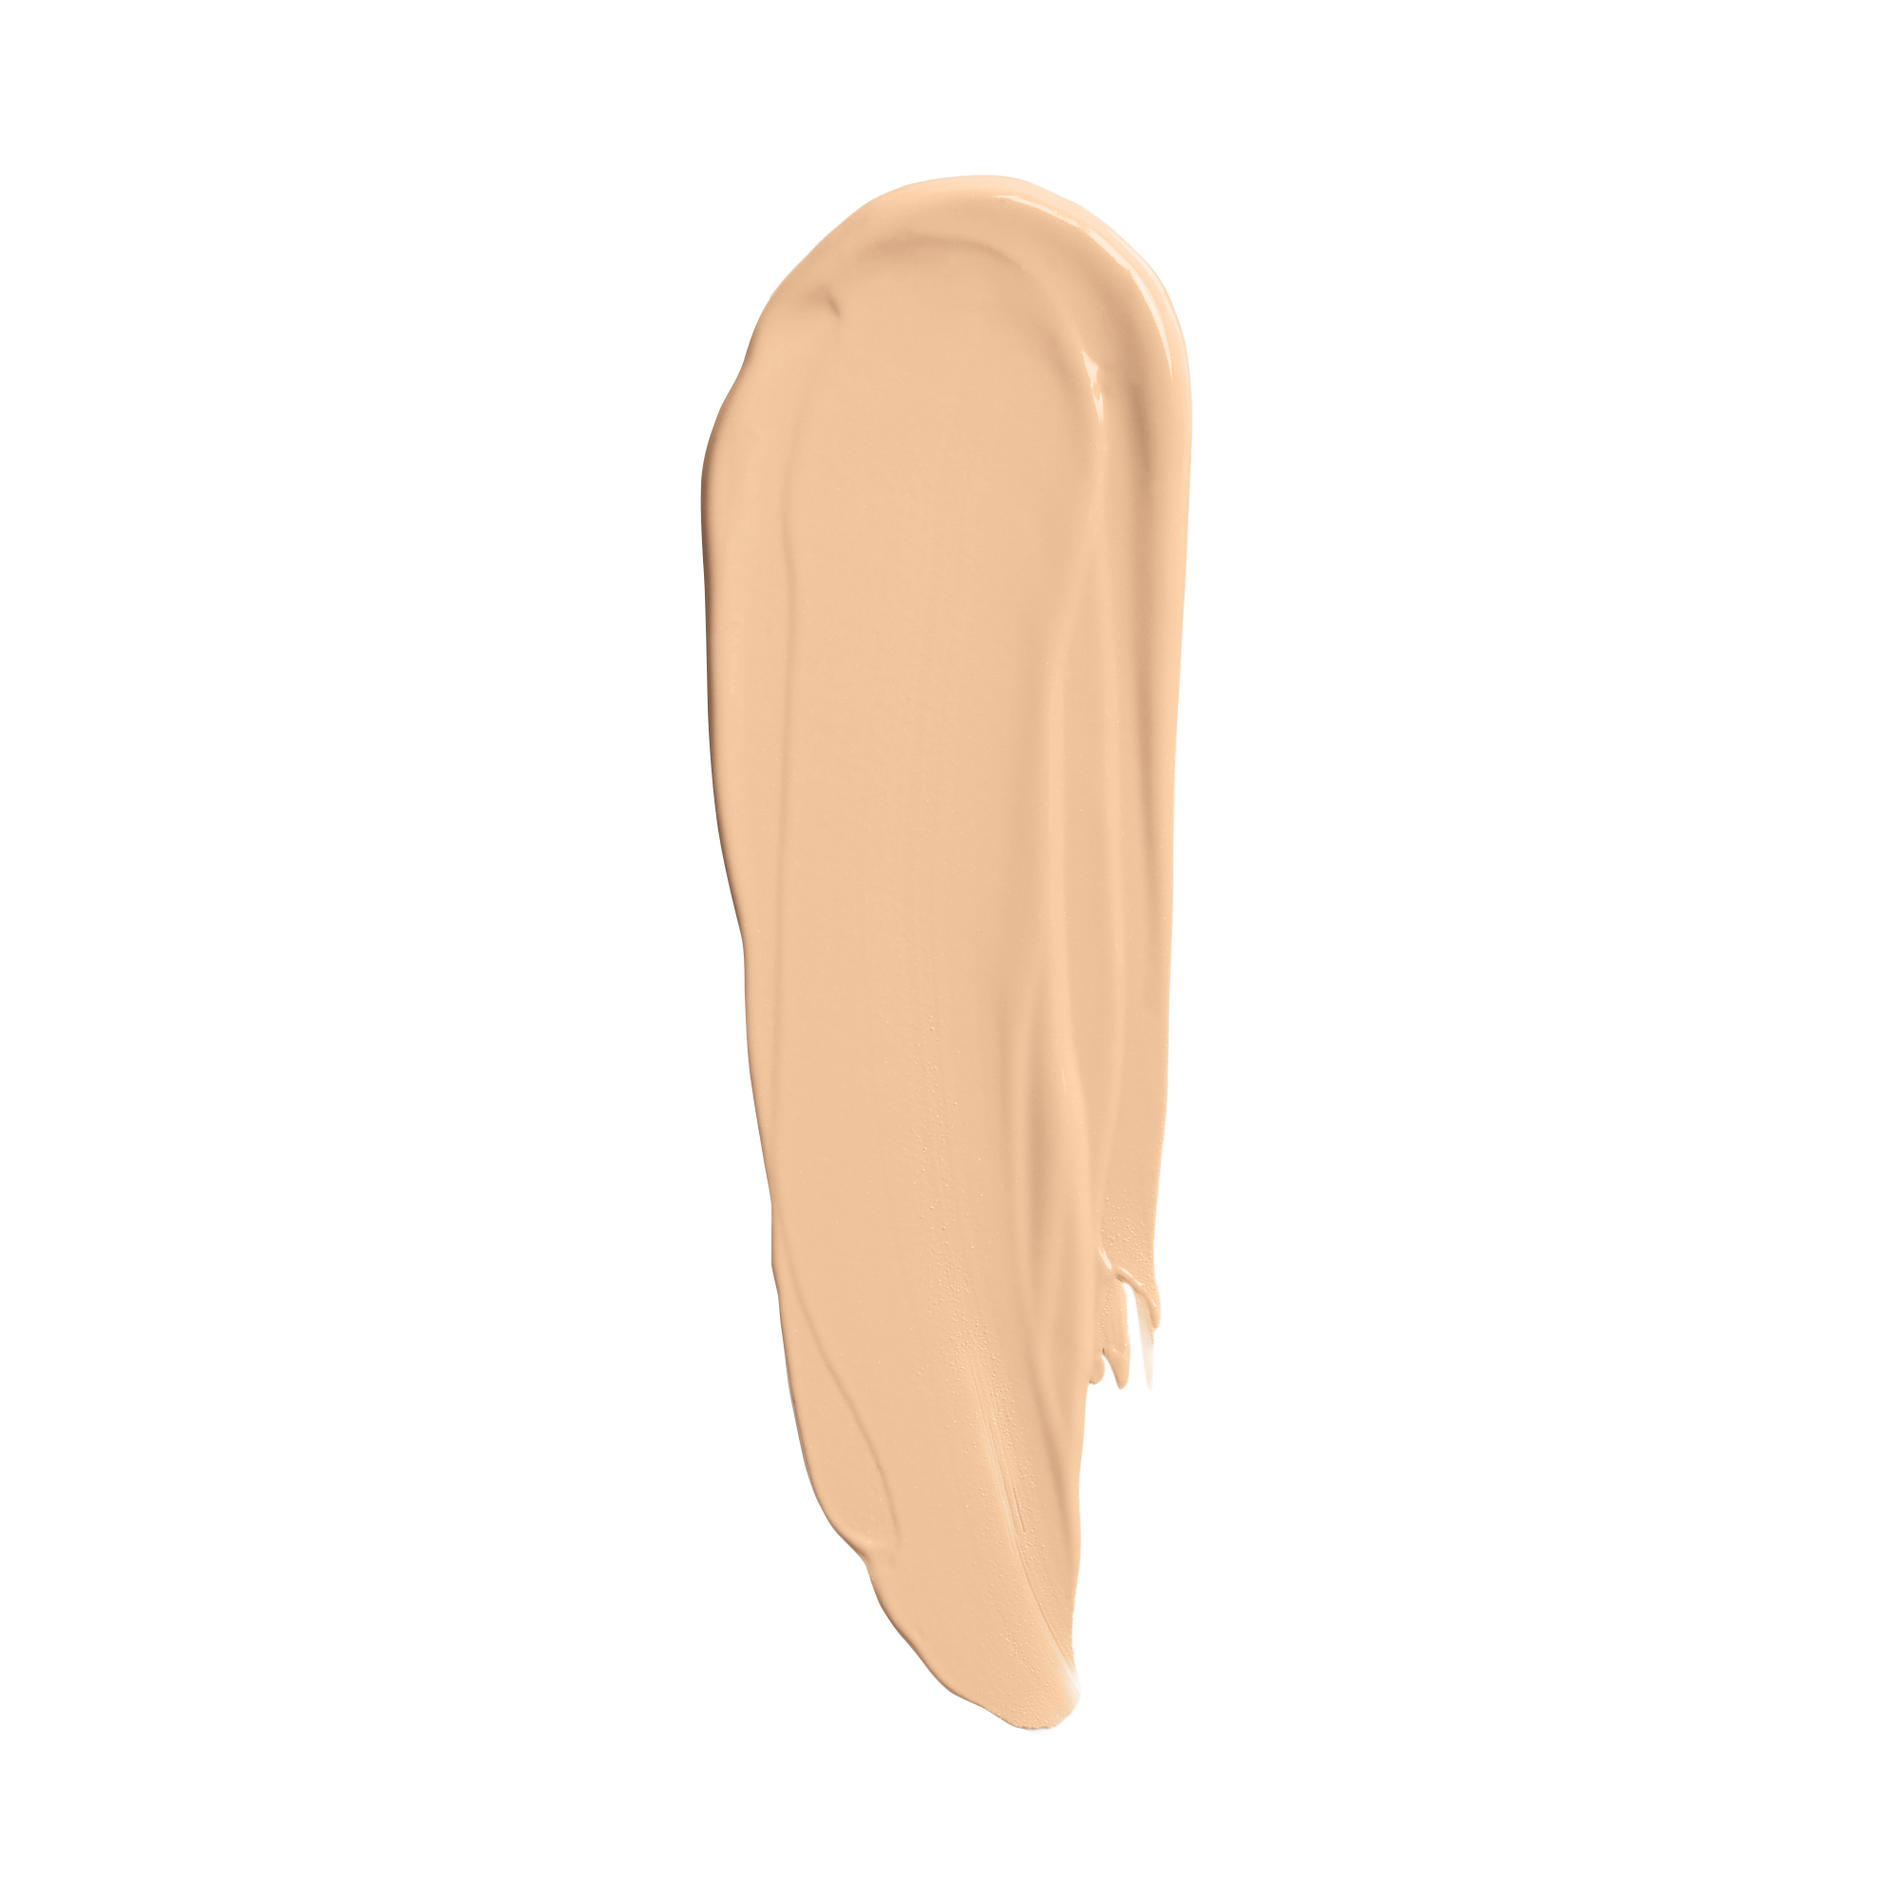 COVERGIRL Outlast All-Day Stay Fabulous 3-in-1 Foundation, 832 Nude Beige - image 2 of 3